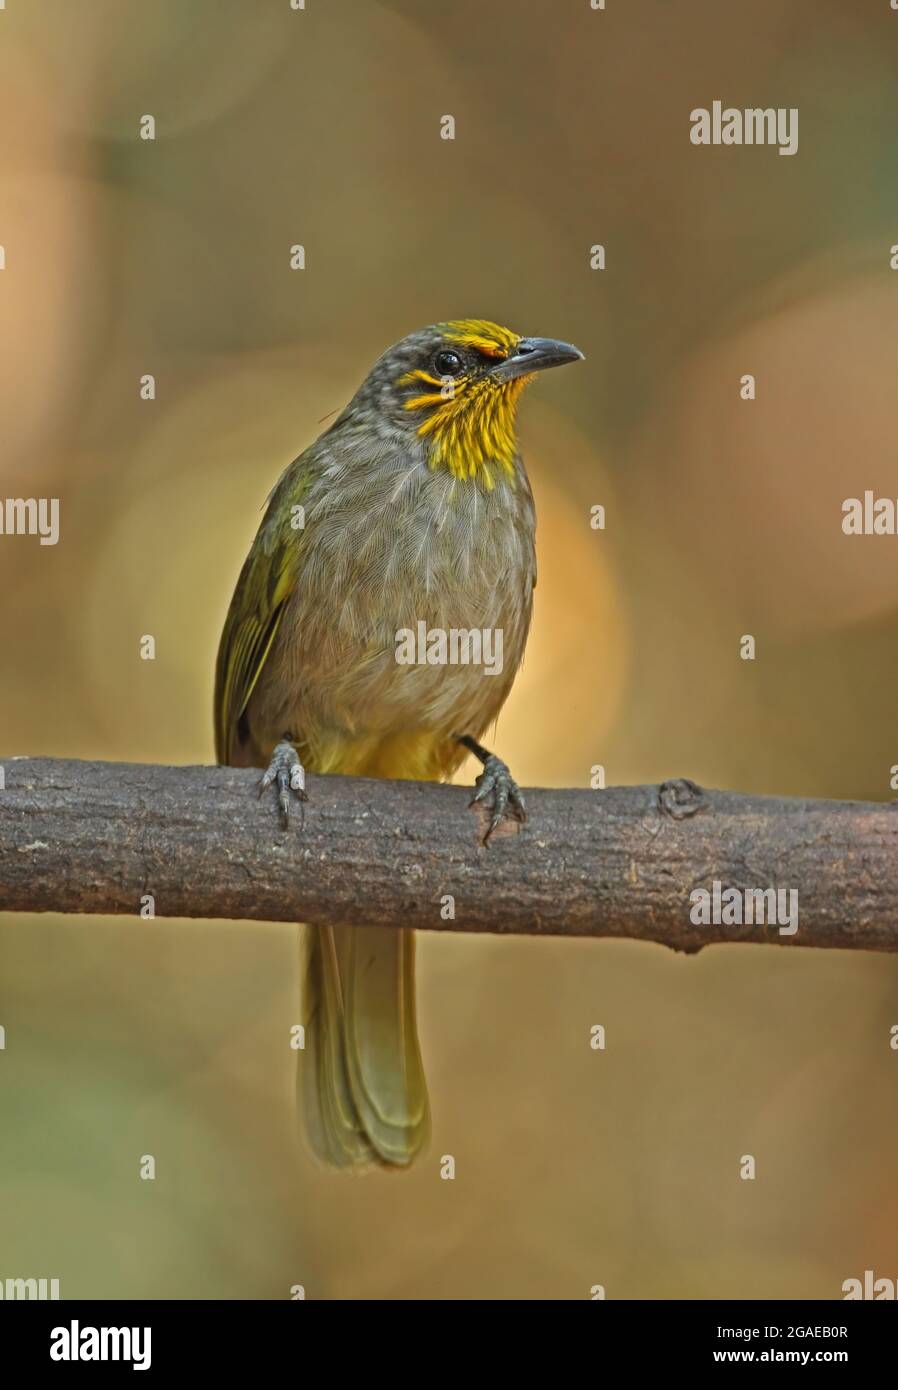 Stripe-throated Bulbul (Pycnonotos finlaysoni eous) adult perched on branch Kaeng Krachan, Thailand            February Stock Photo